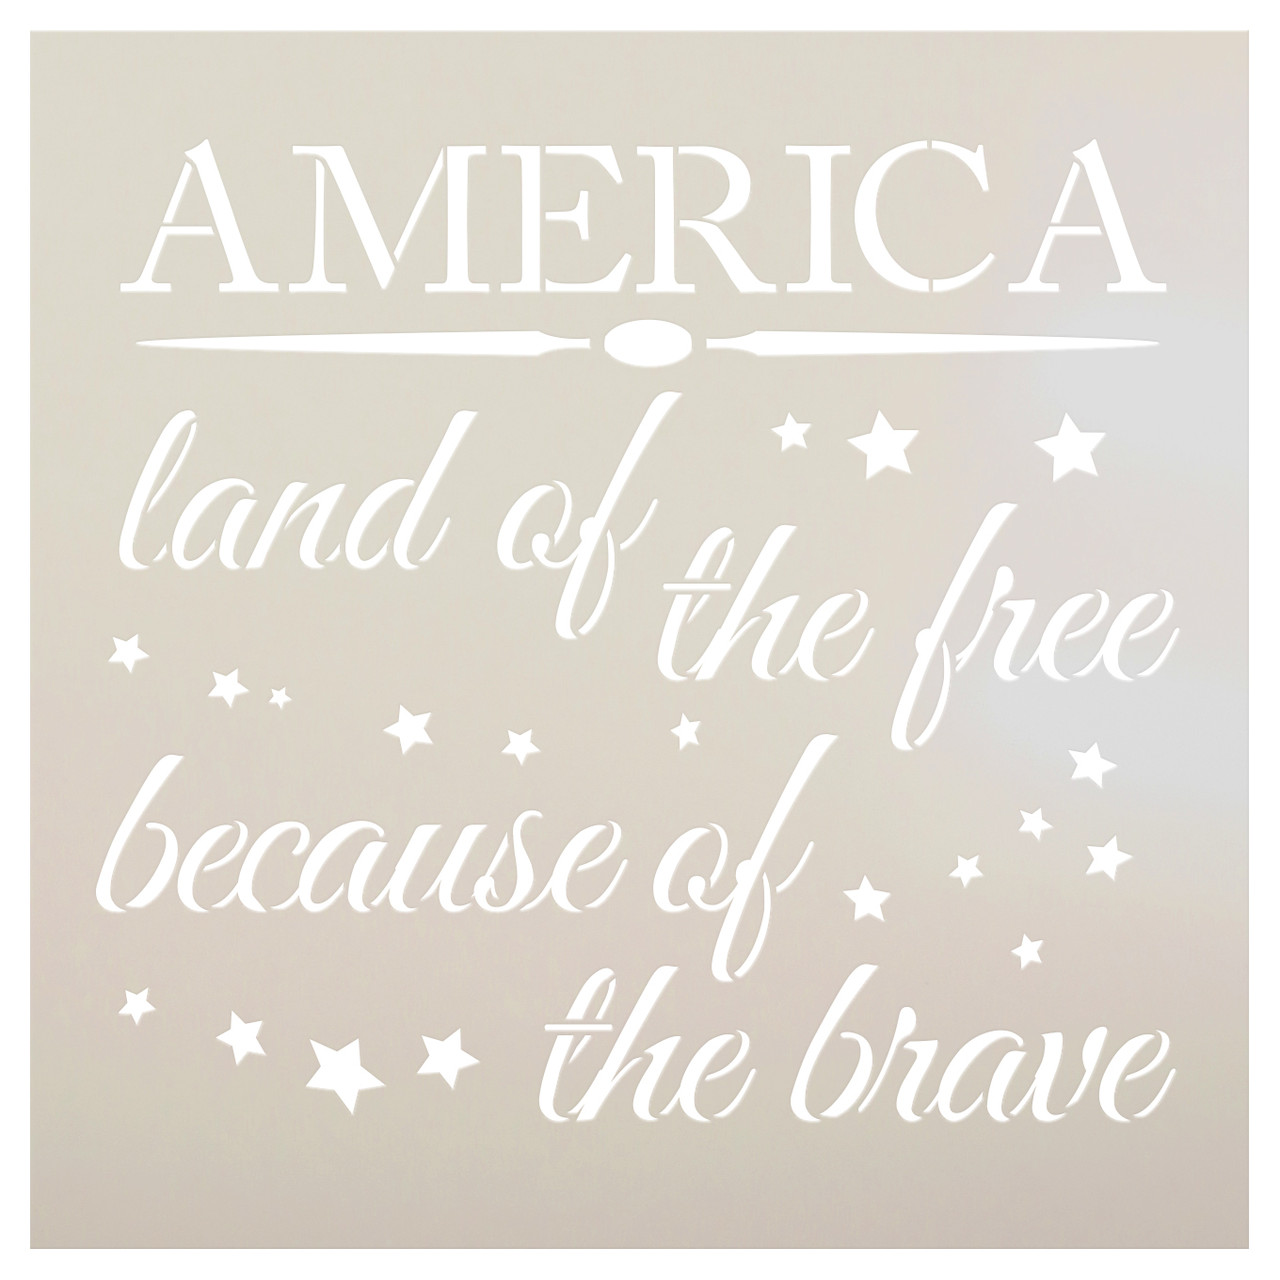 America - Land of The Free Because of the Brave - Word Art Stencil - 12" x 12" - STCL1233_2 by StudioR12